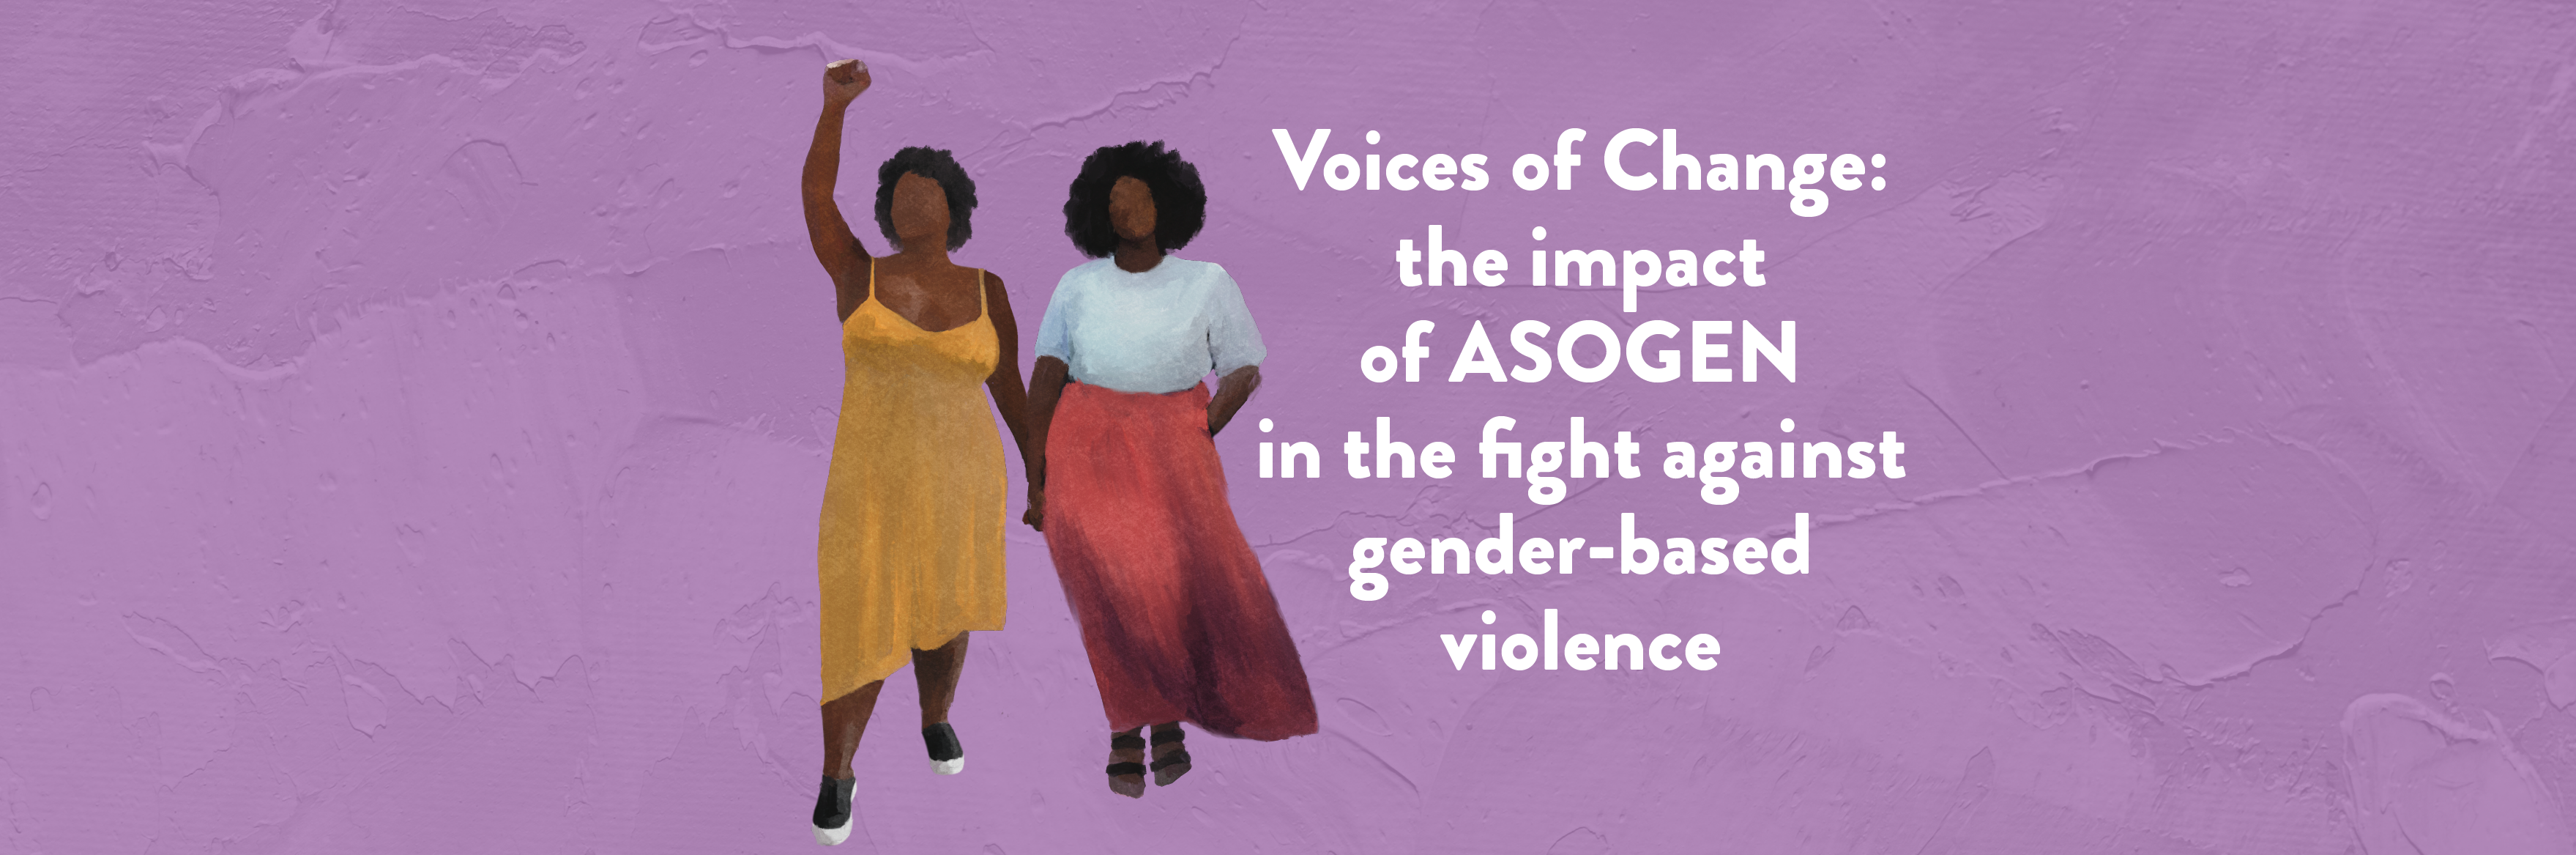 Voices of Change: the impact of ASOGEN in the fight against gender-based violence 